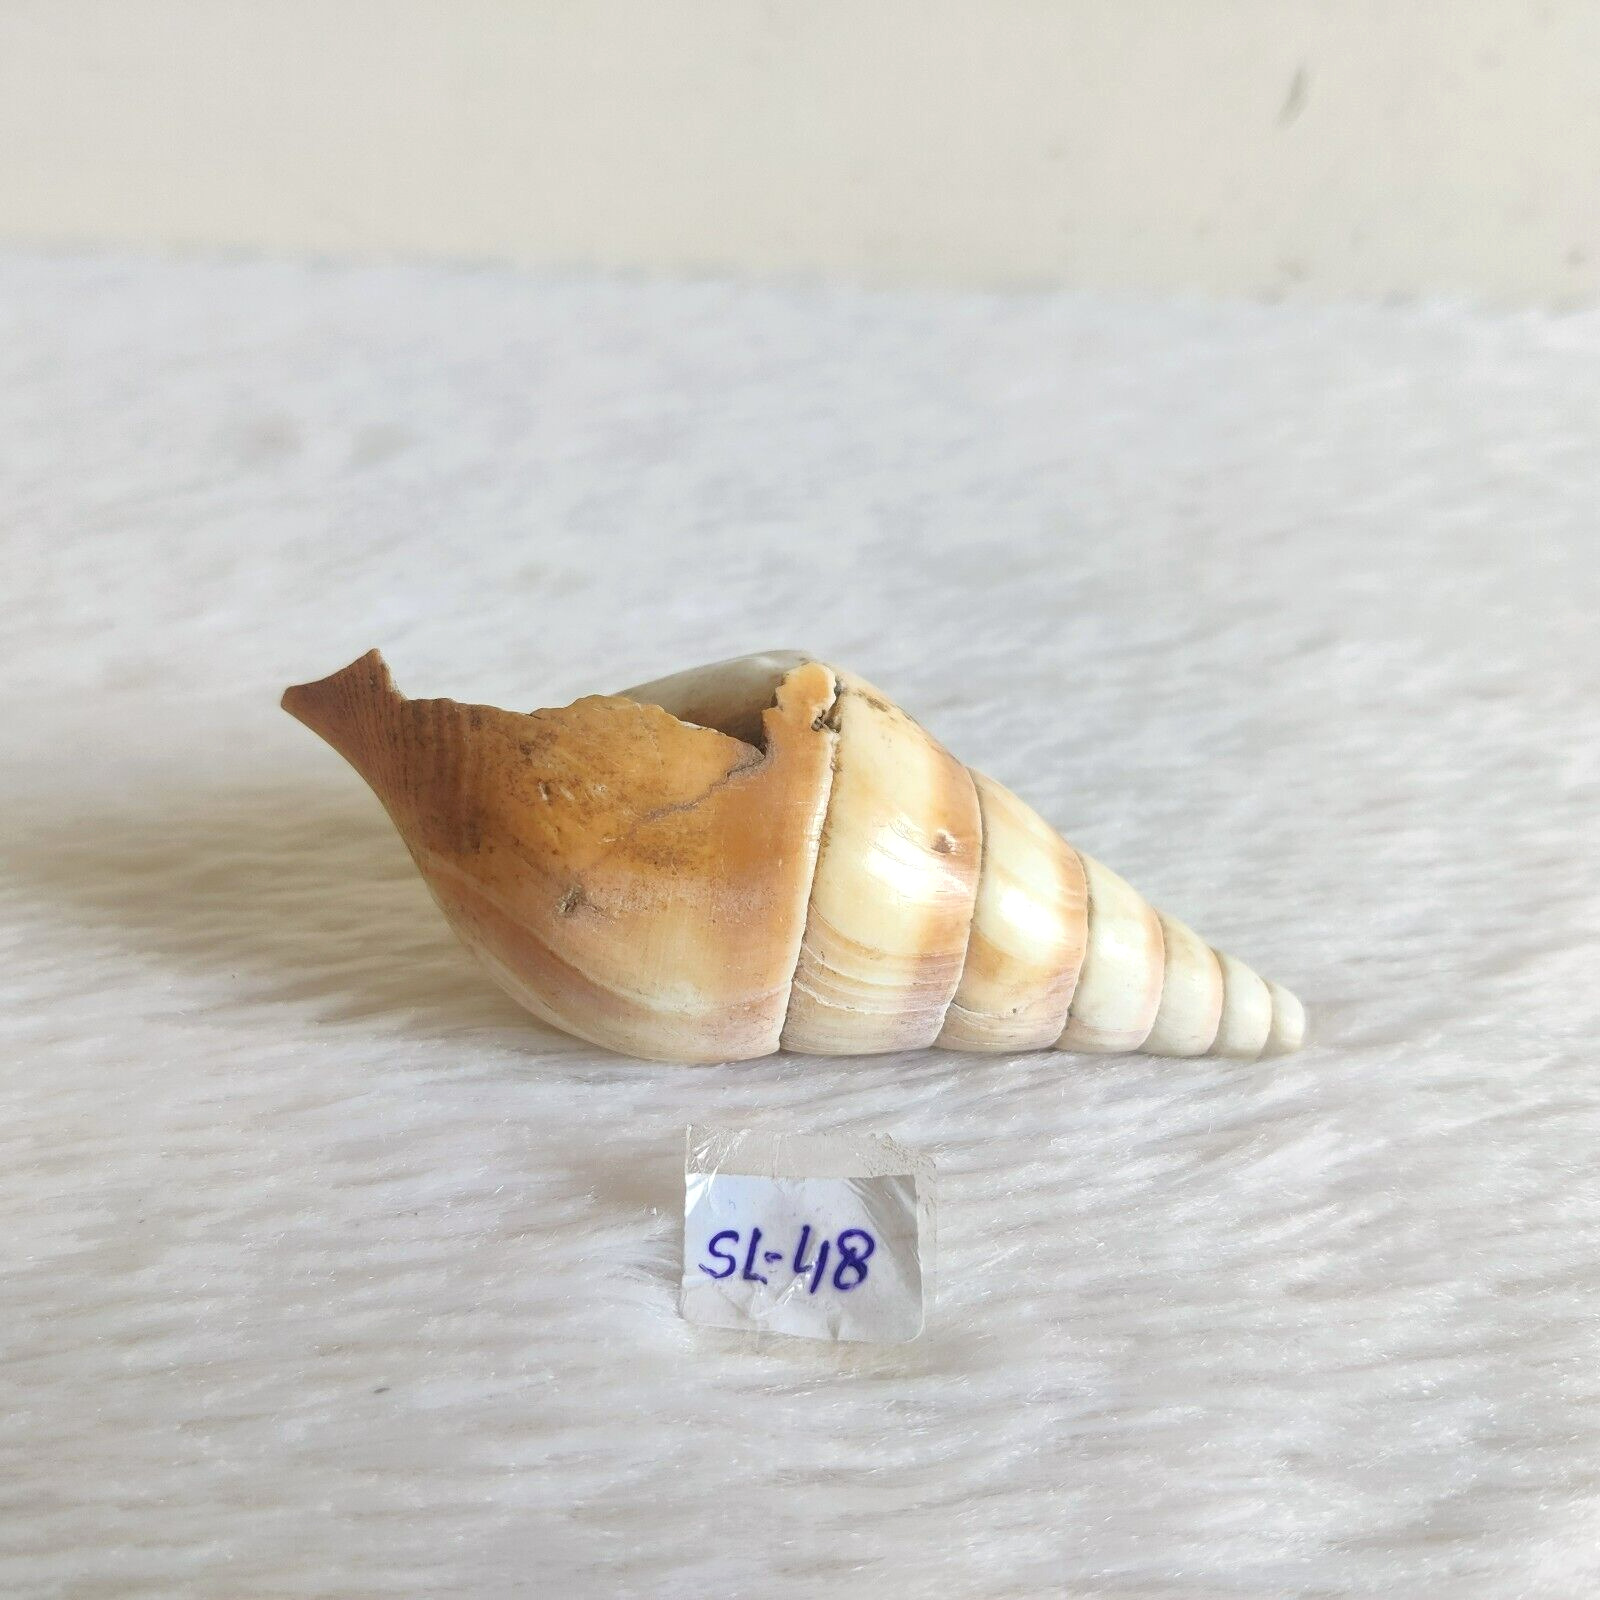 Vintage White Natural Swirl Conch Shell Beach Decorative Old Collectible SL48